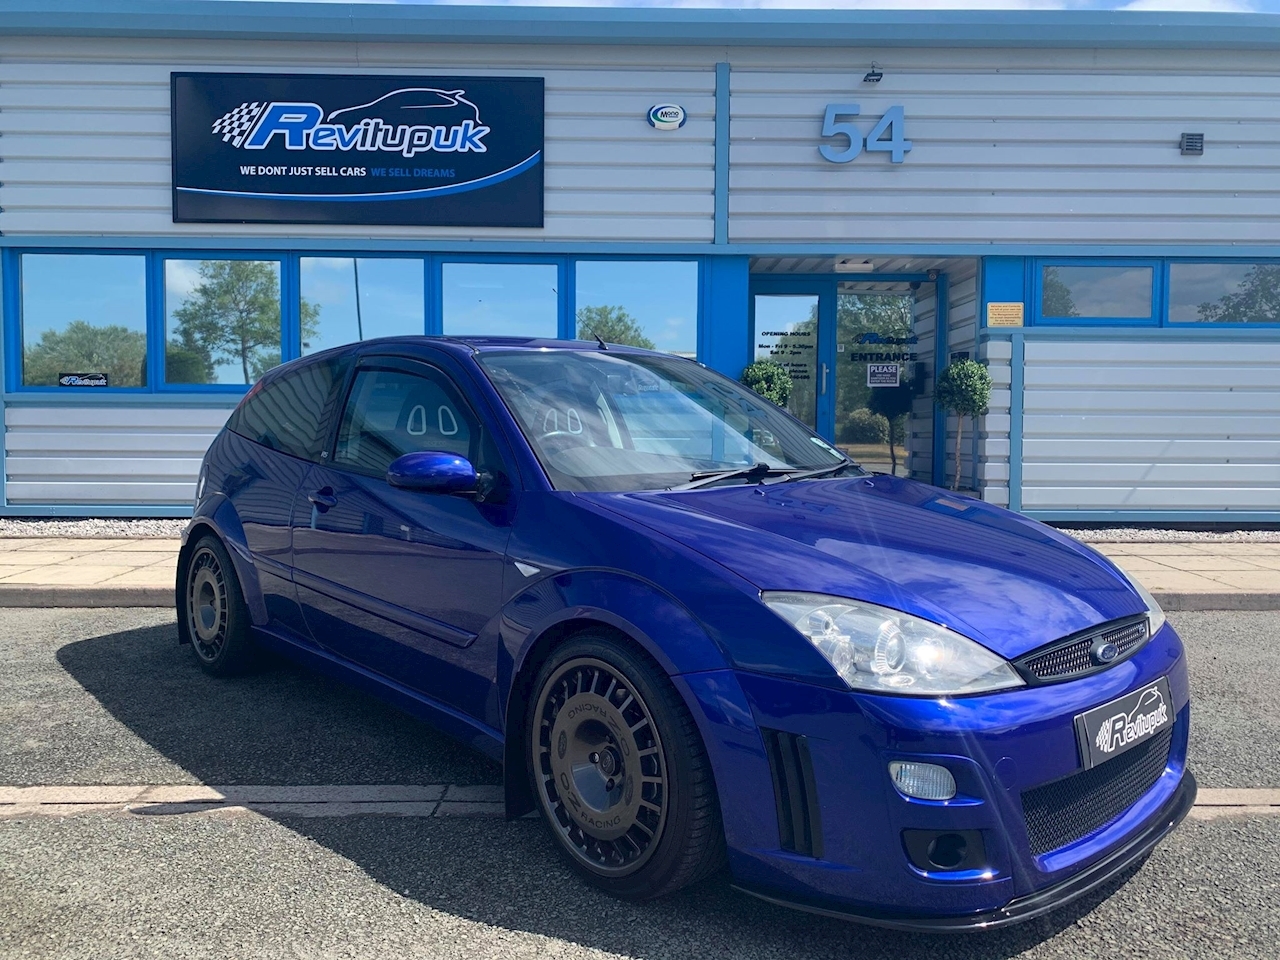 Used 2003 Ford Focus Rs Hatchback 2.0 Manual Petrol For Sale in